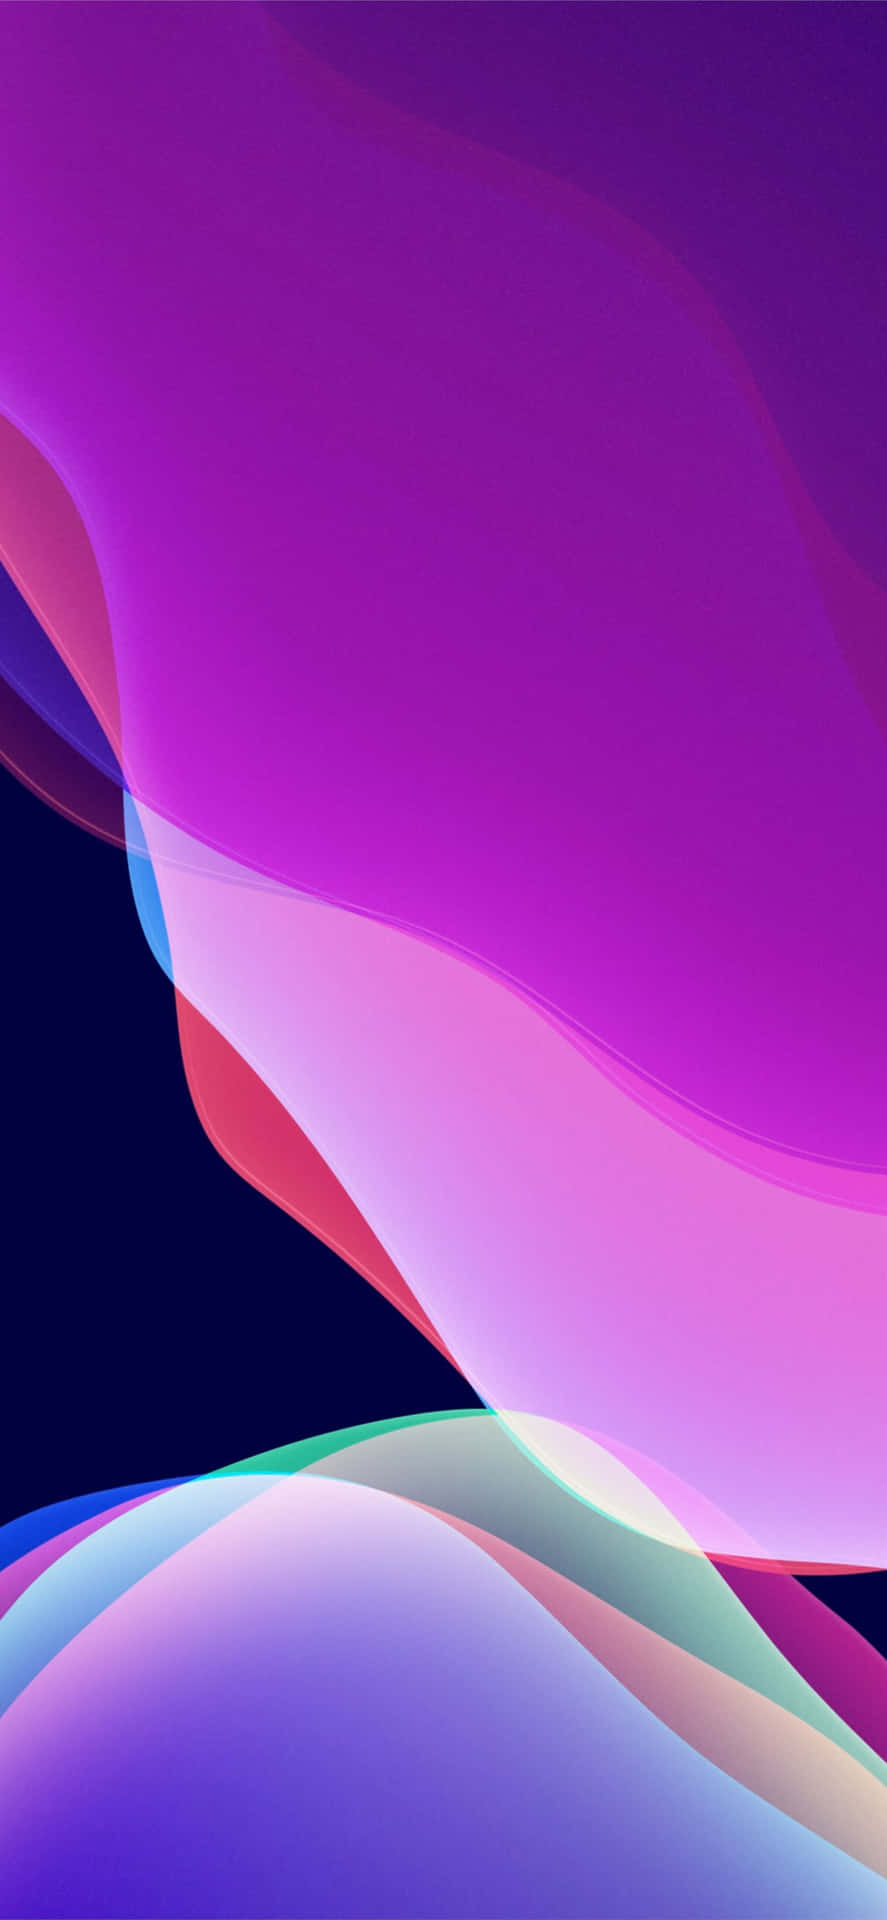 An Abstract Purple And Blue Background Wallpaper